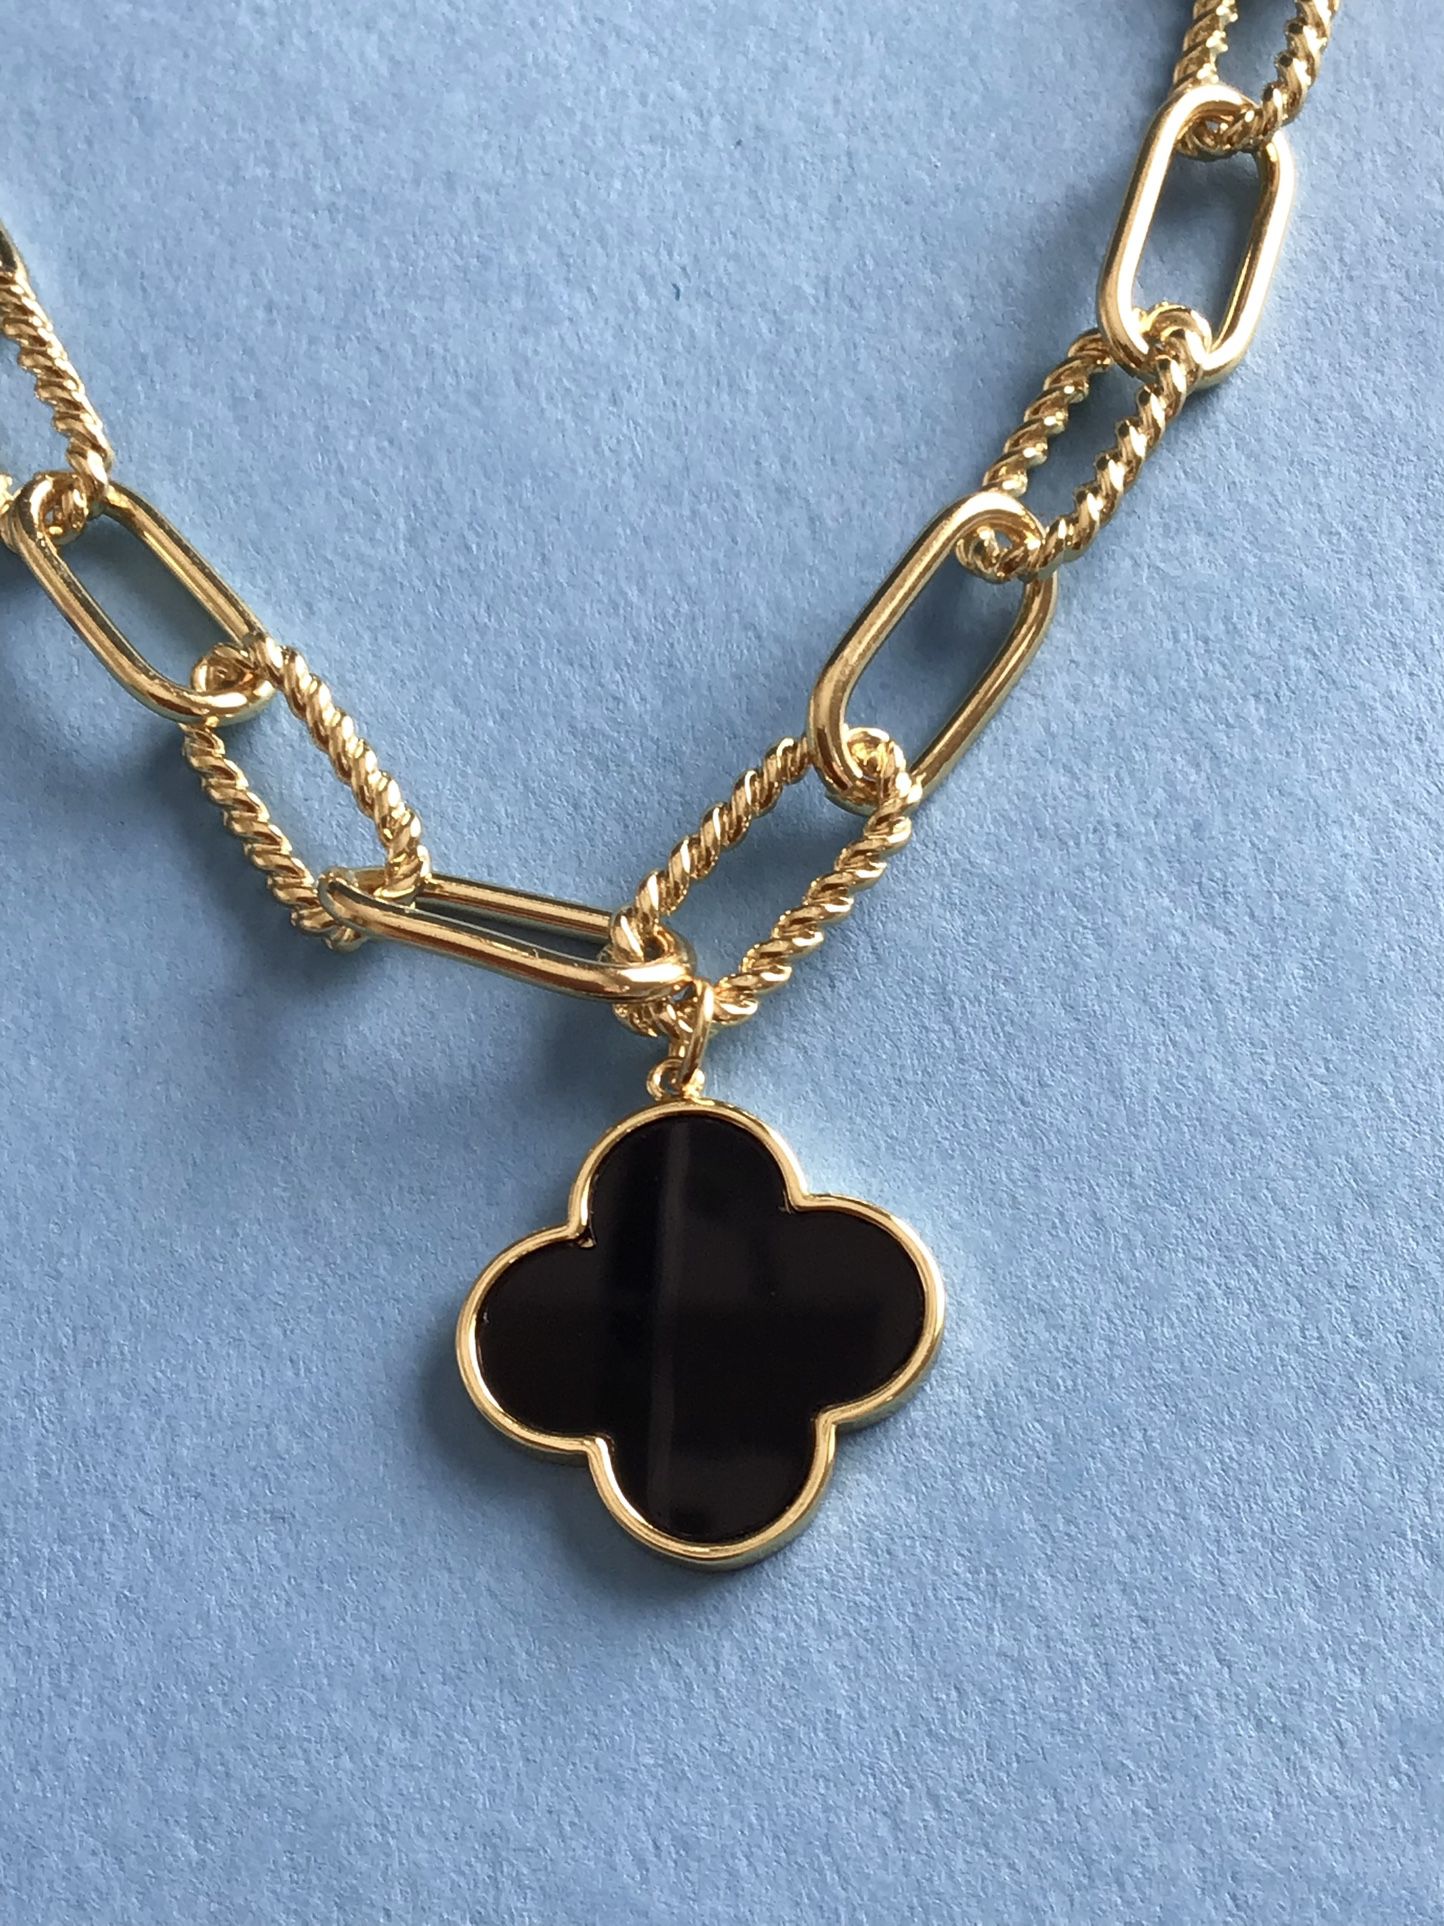 Ladies Necklace - Gold Cable/Paperclip w/Black Quatrefoil  Dangling *Ship Nationwide Or Pickup Boca Raton 